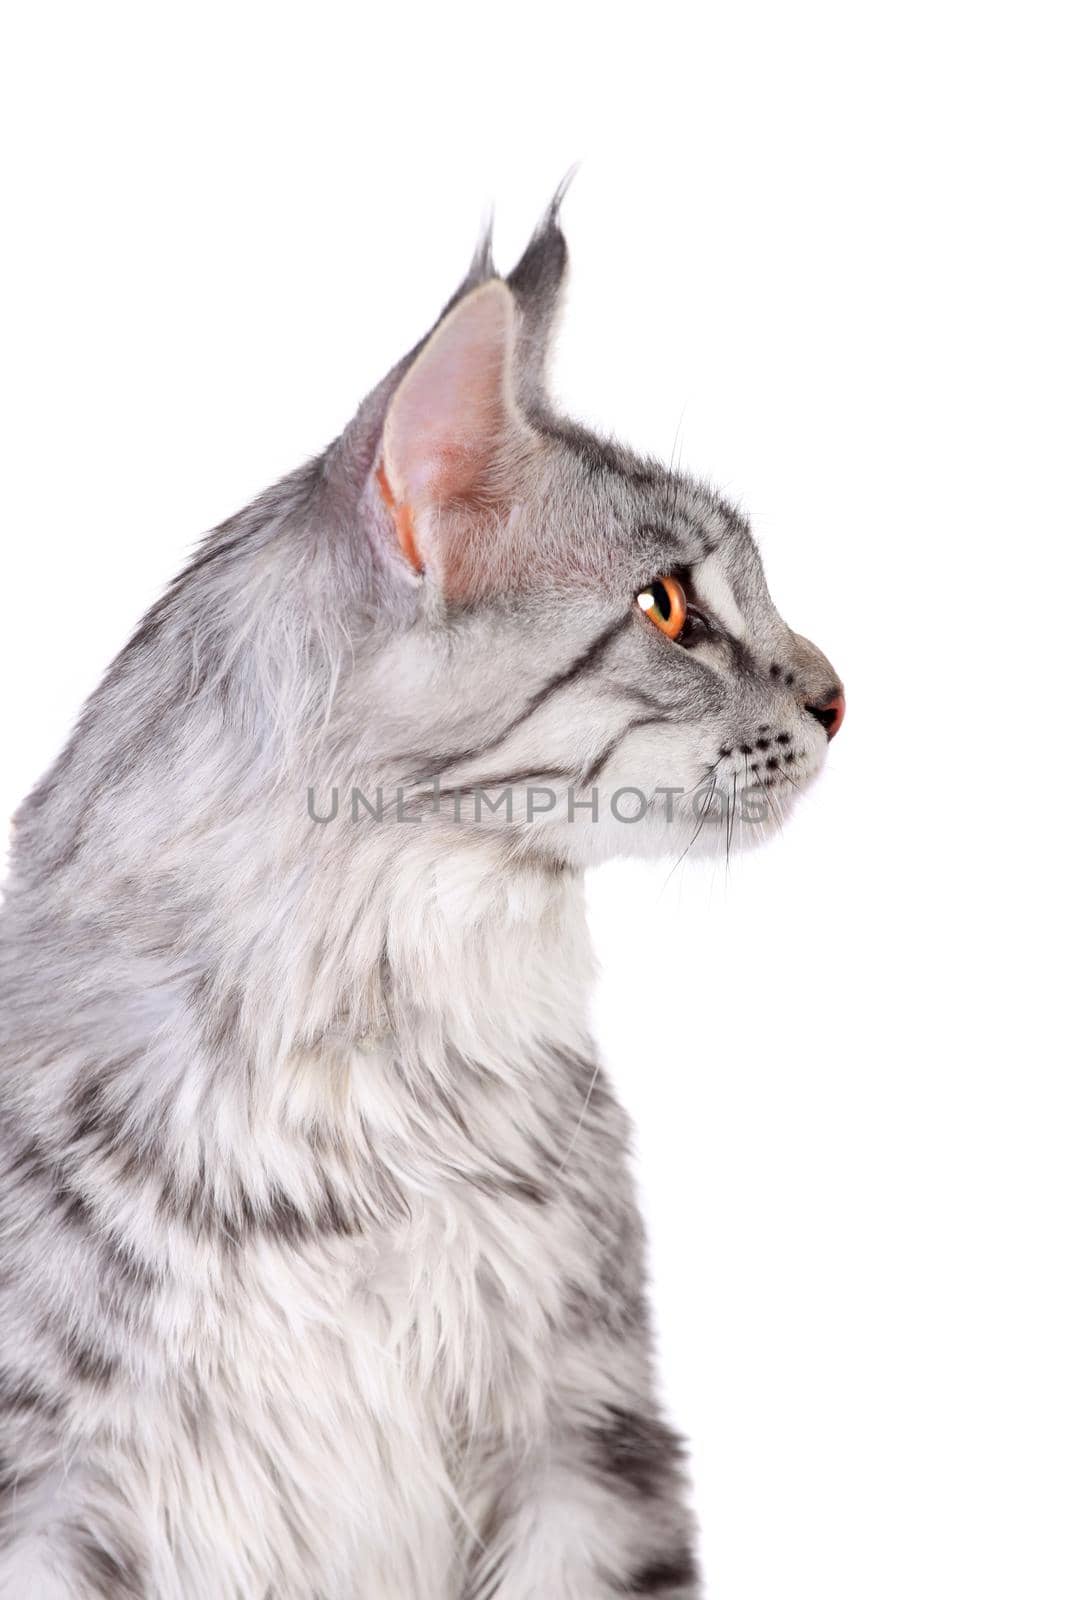 Silver tabby maine coon kitten, 5 month, of a white background